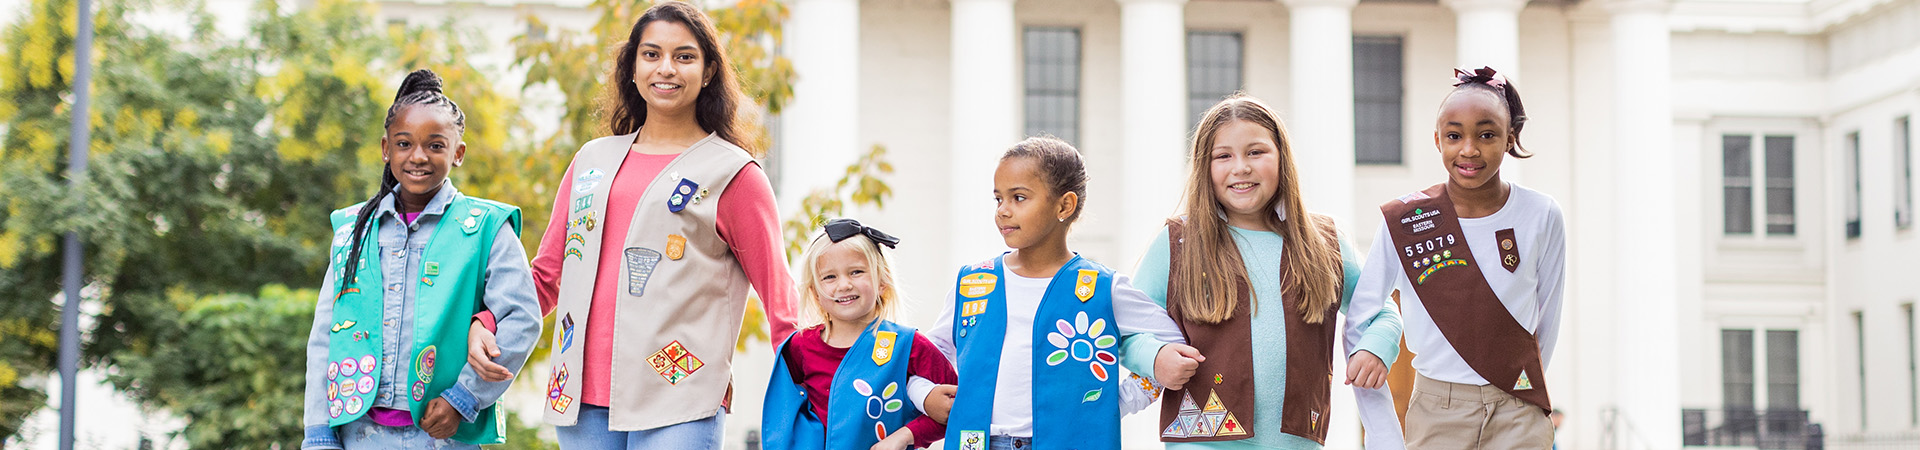  girl scouts in front of building smiling 